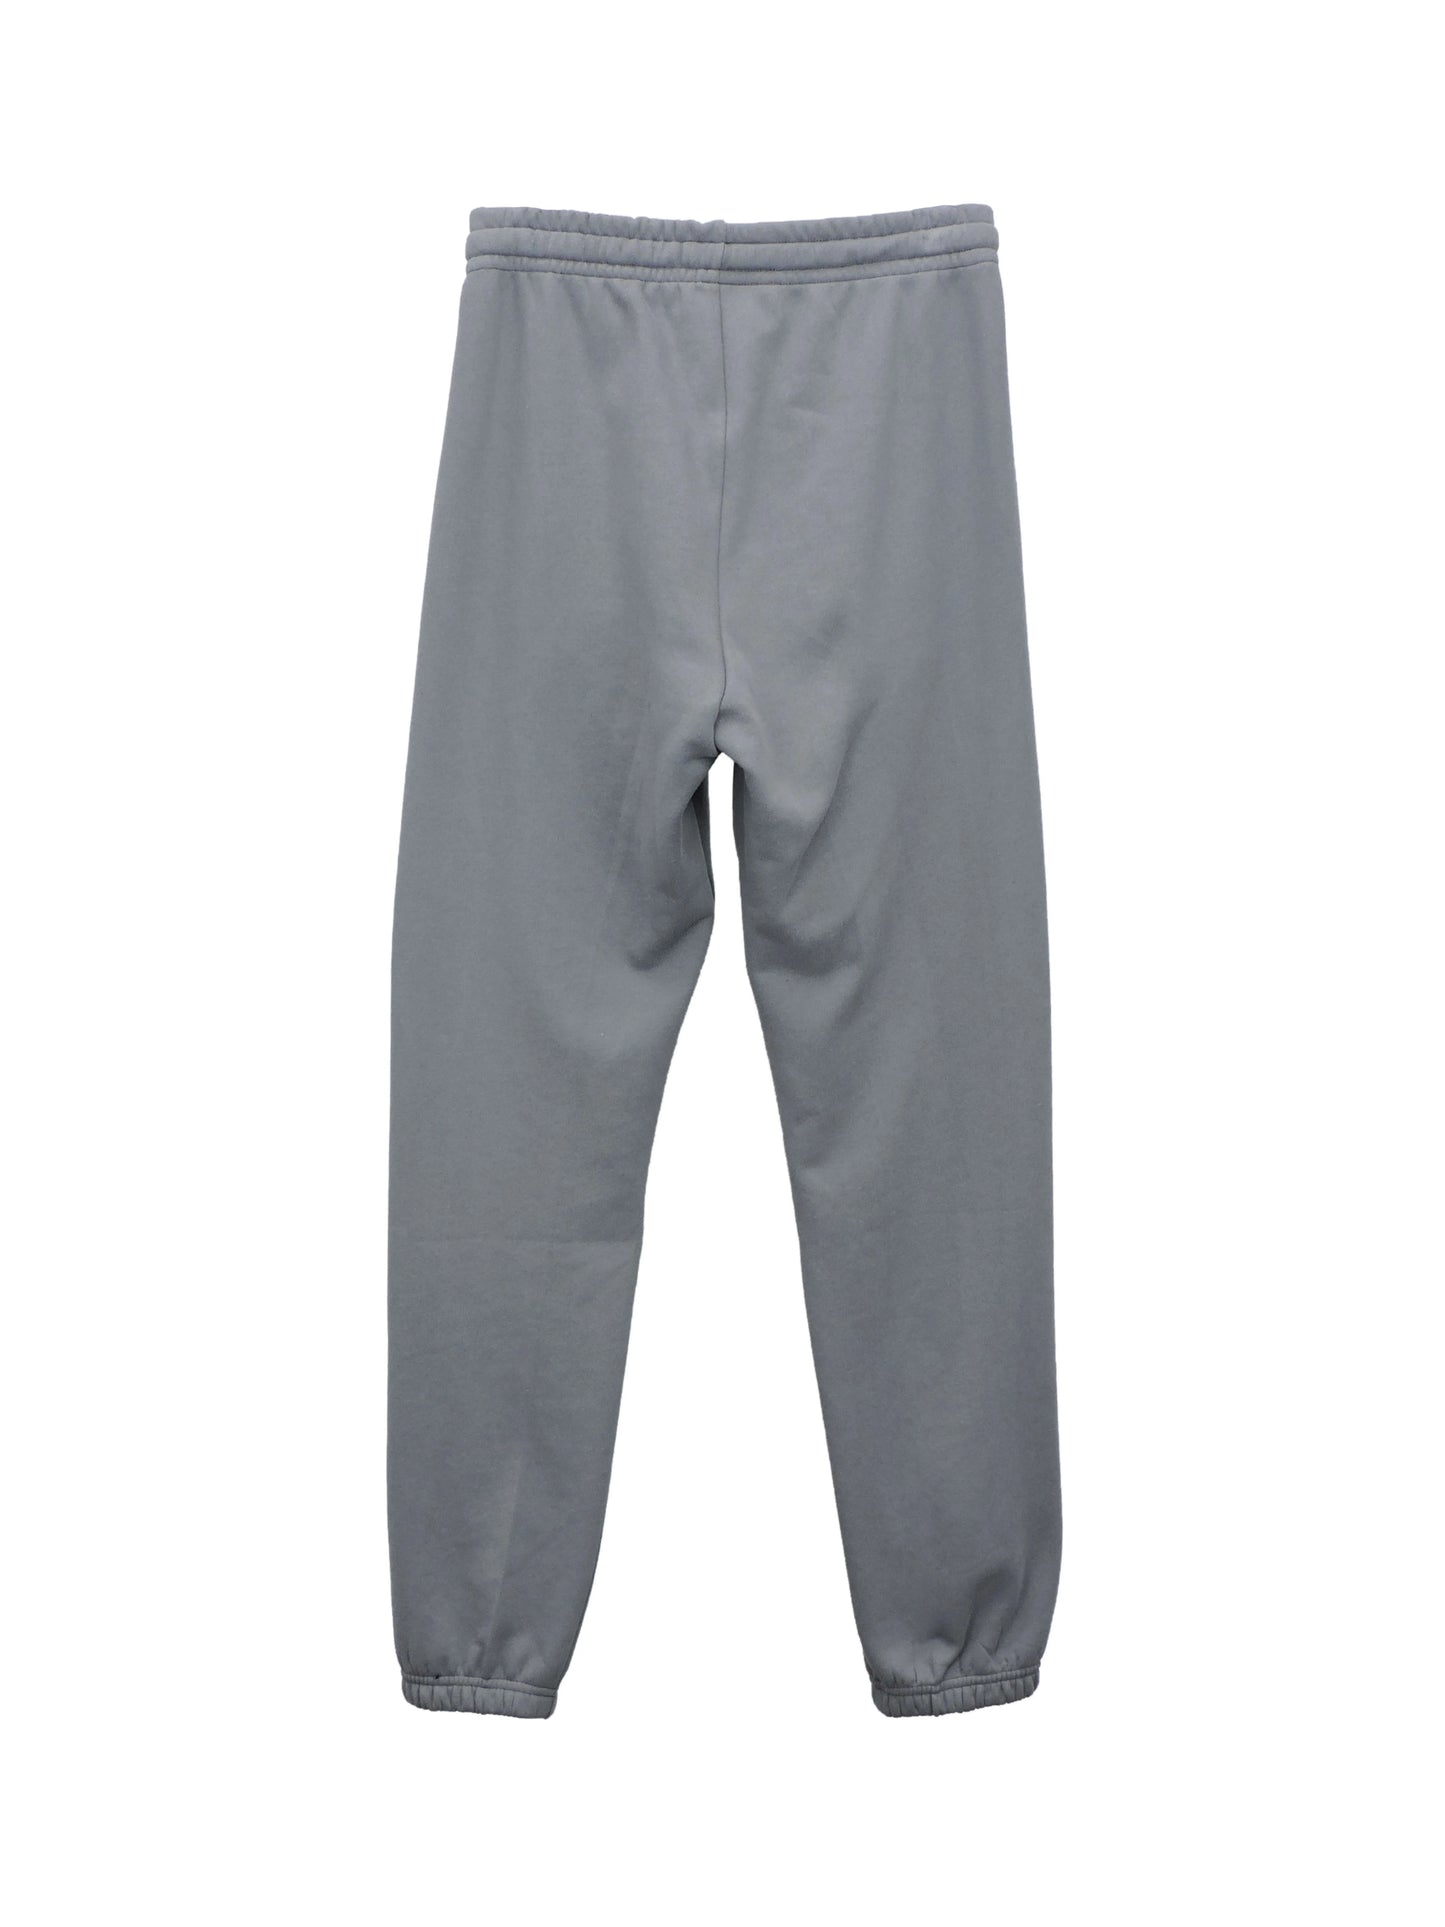 Back of Sweatpants with Elastic Ankle Cuffs